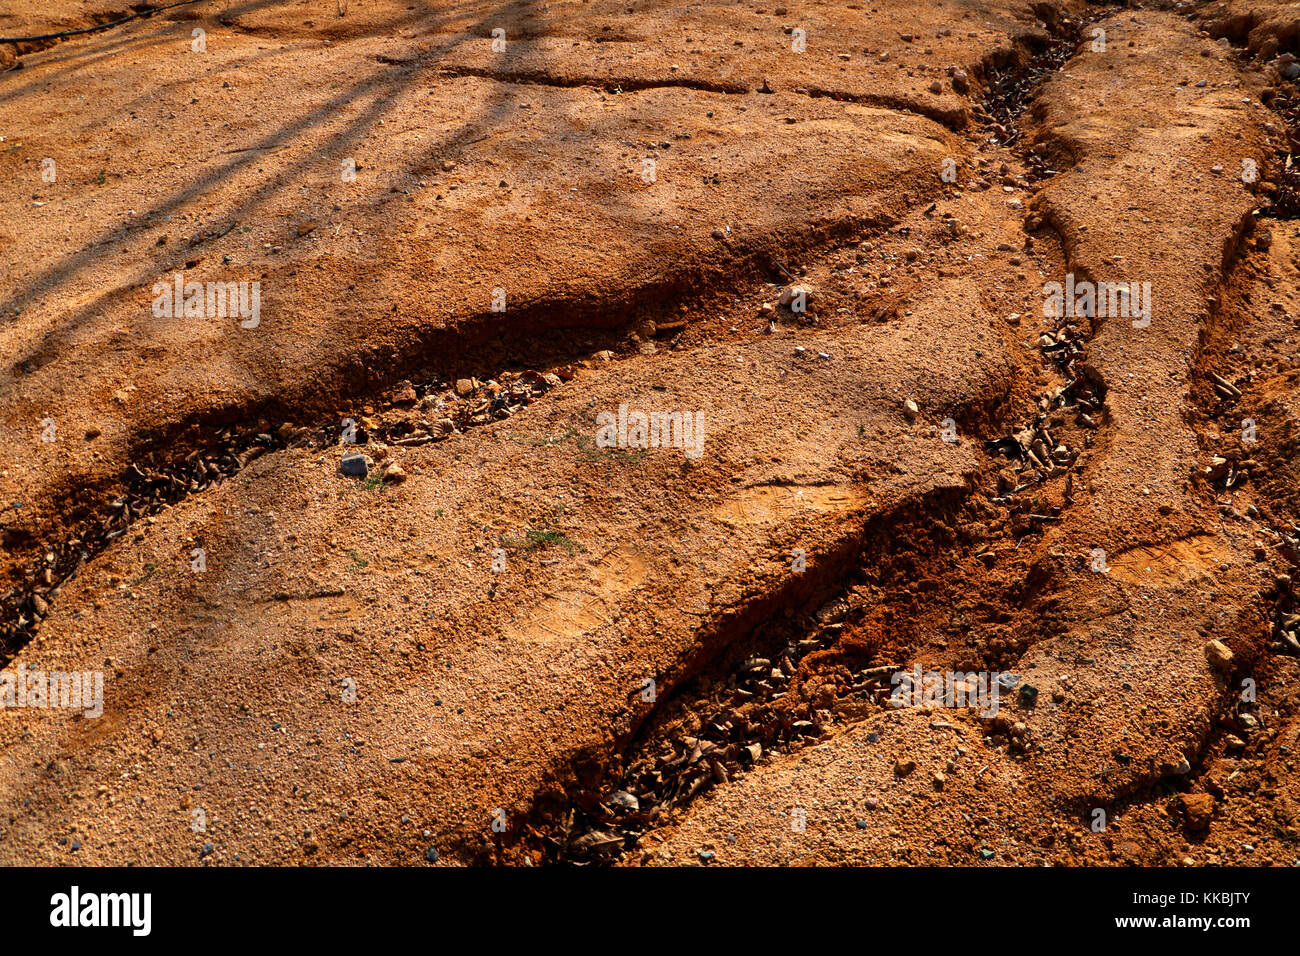 Abstract background of soil erosion, roadside slope. Soil furrowed by deep rain gullies. Stock Photo